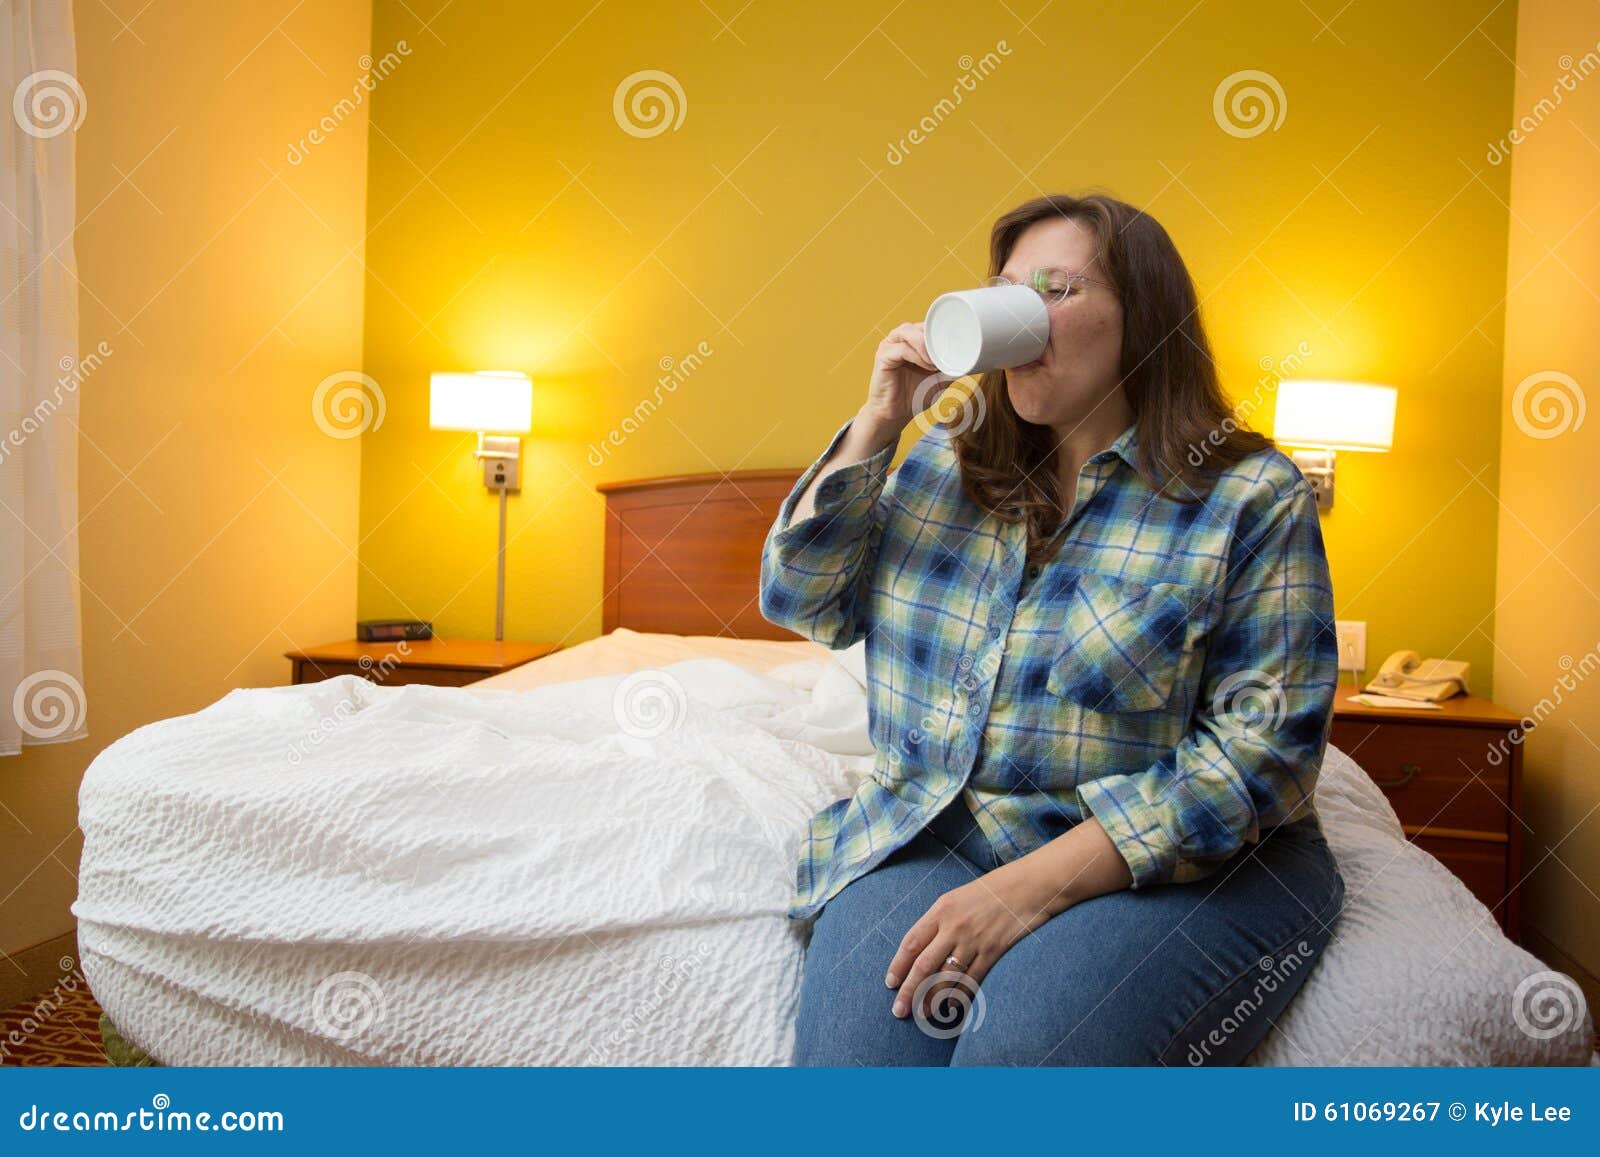 Woman Alone In Hotel Room Stock Image Image Of Female